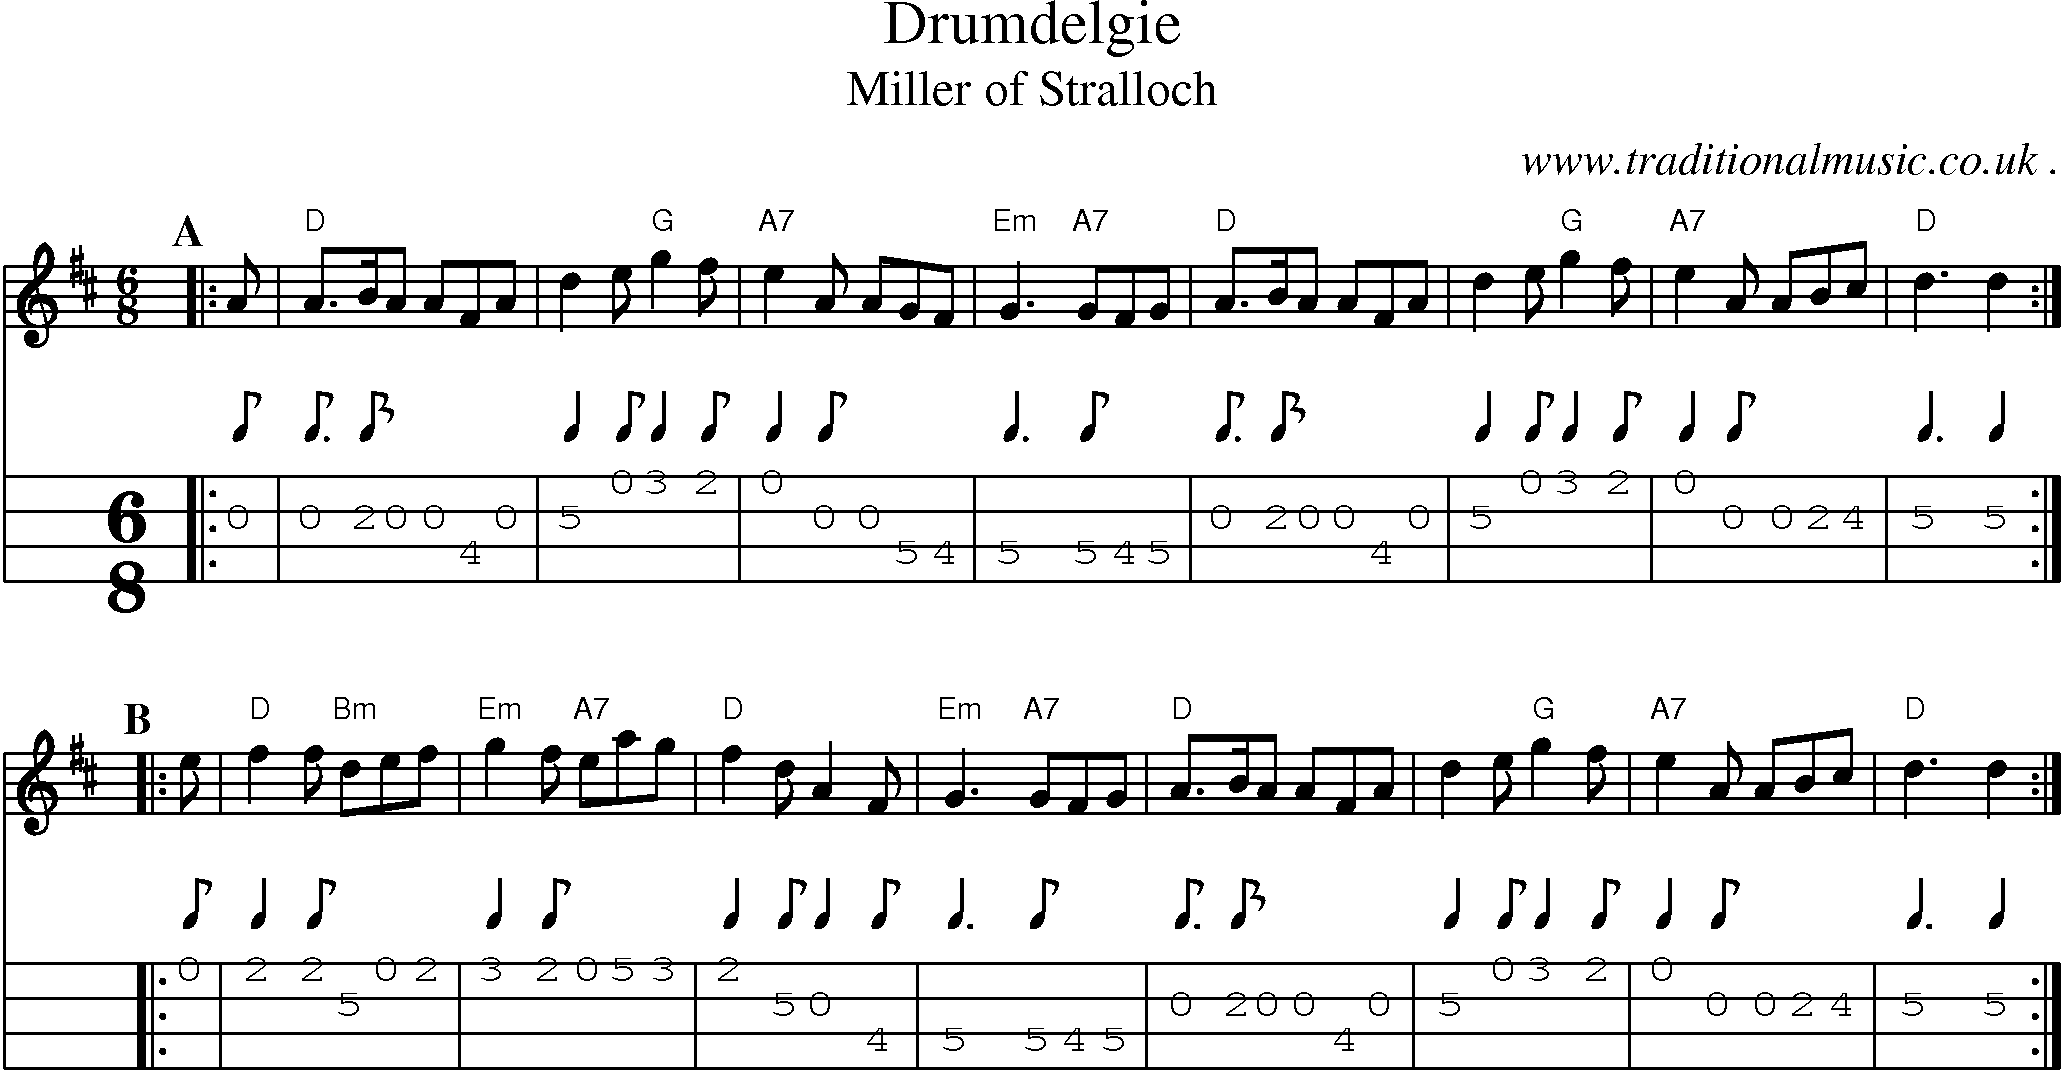 Sheet-music  score, Chords and Mandolin Tabs for Drumdelgie